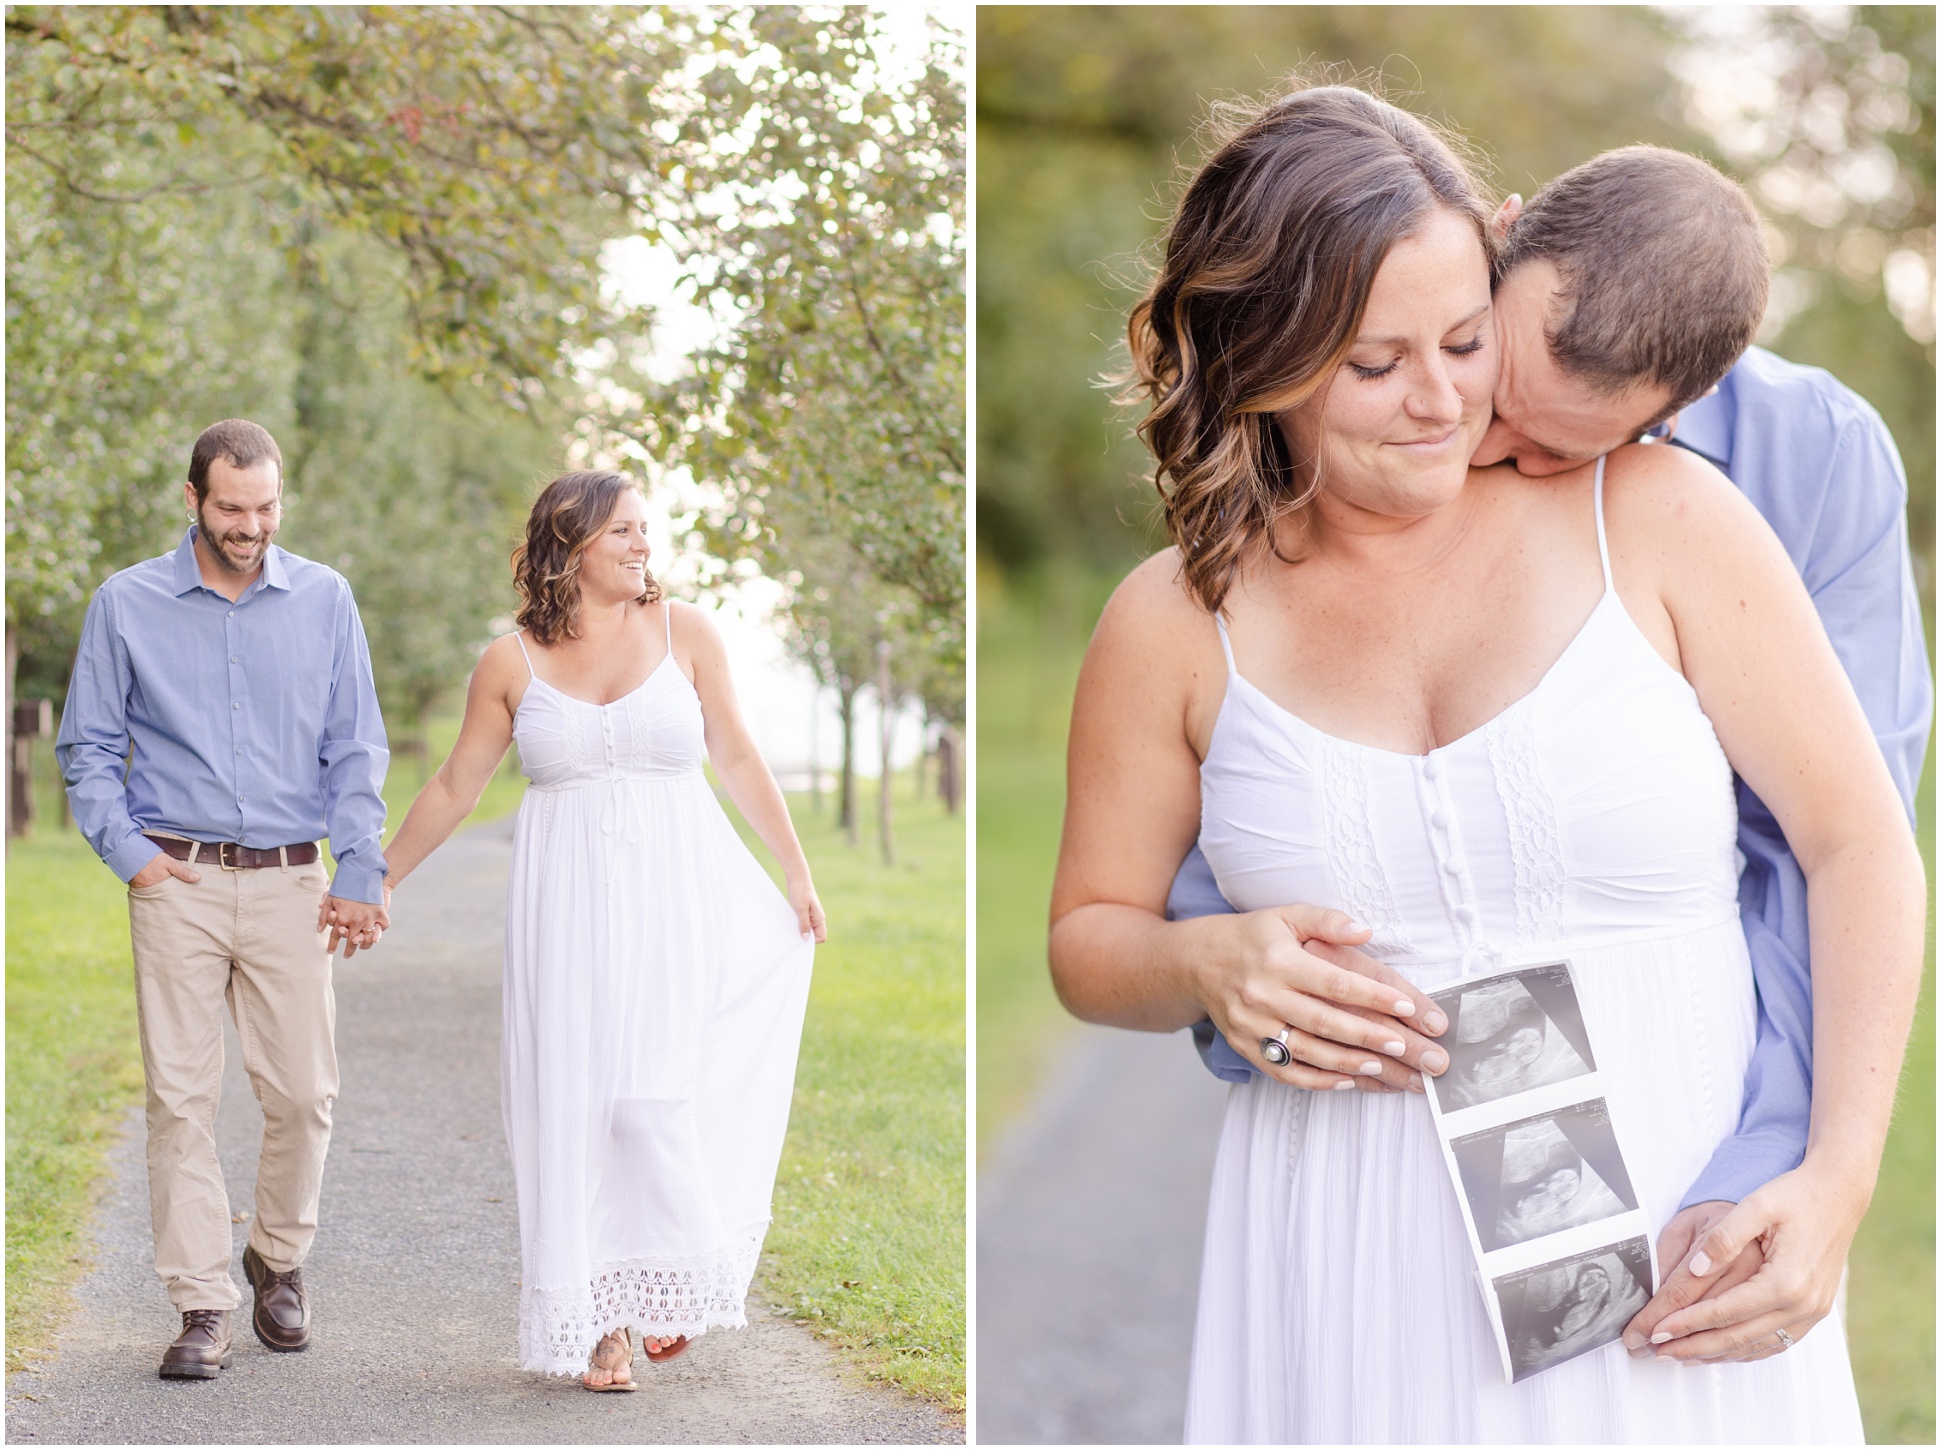 Two images of Mallory and jimmy walking and holding sonogram